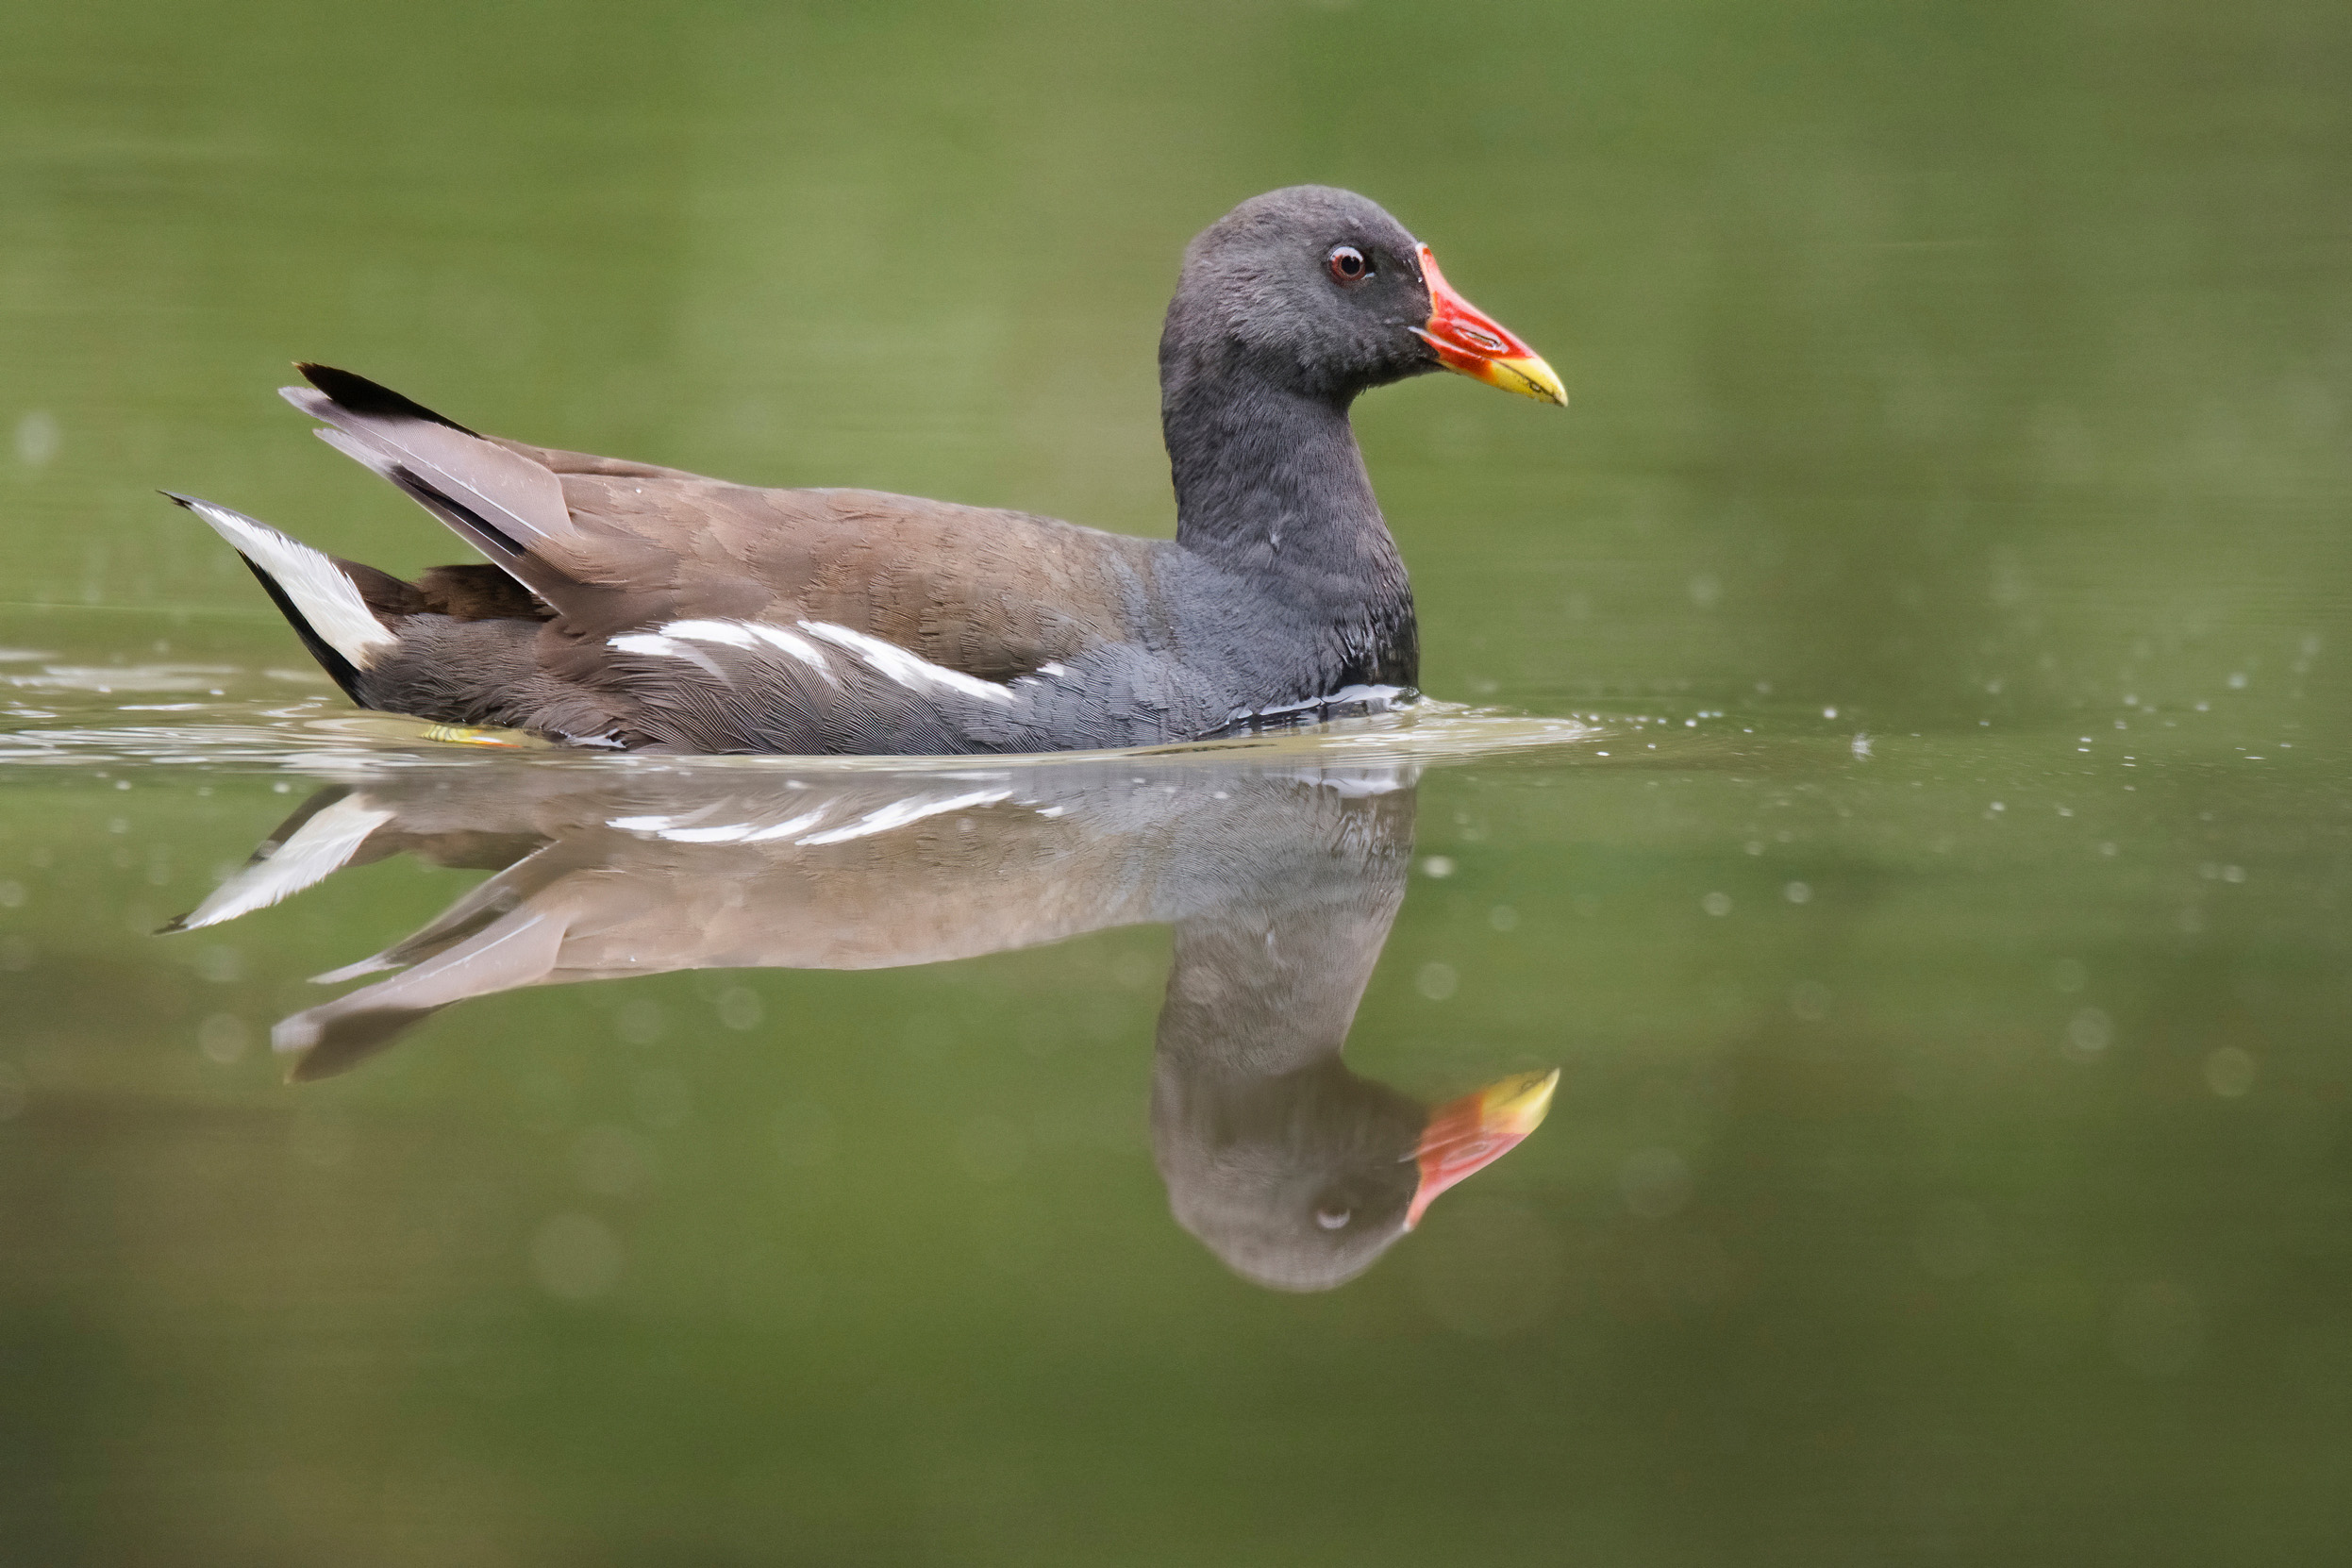 A close up view of a Moorhen swimming in water.